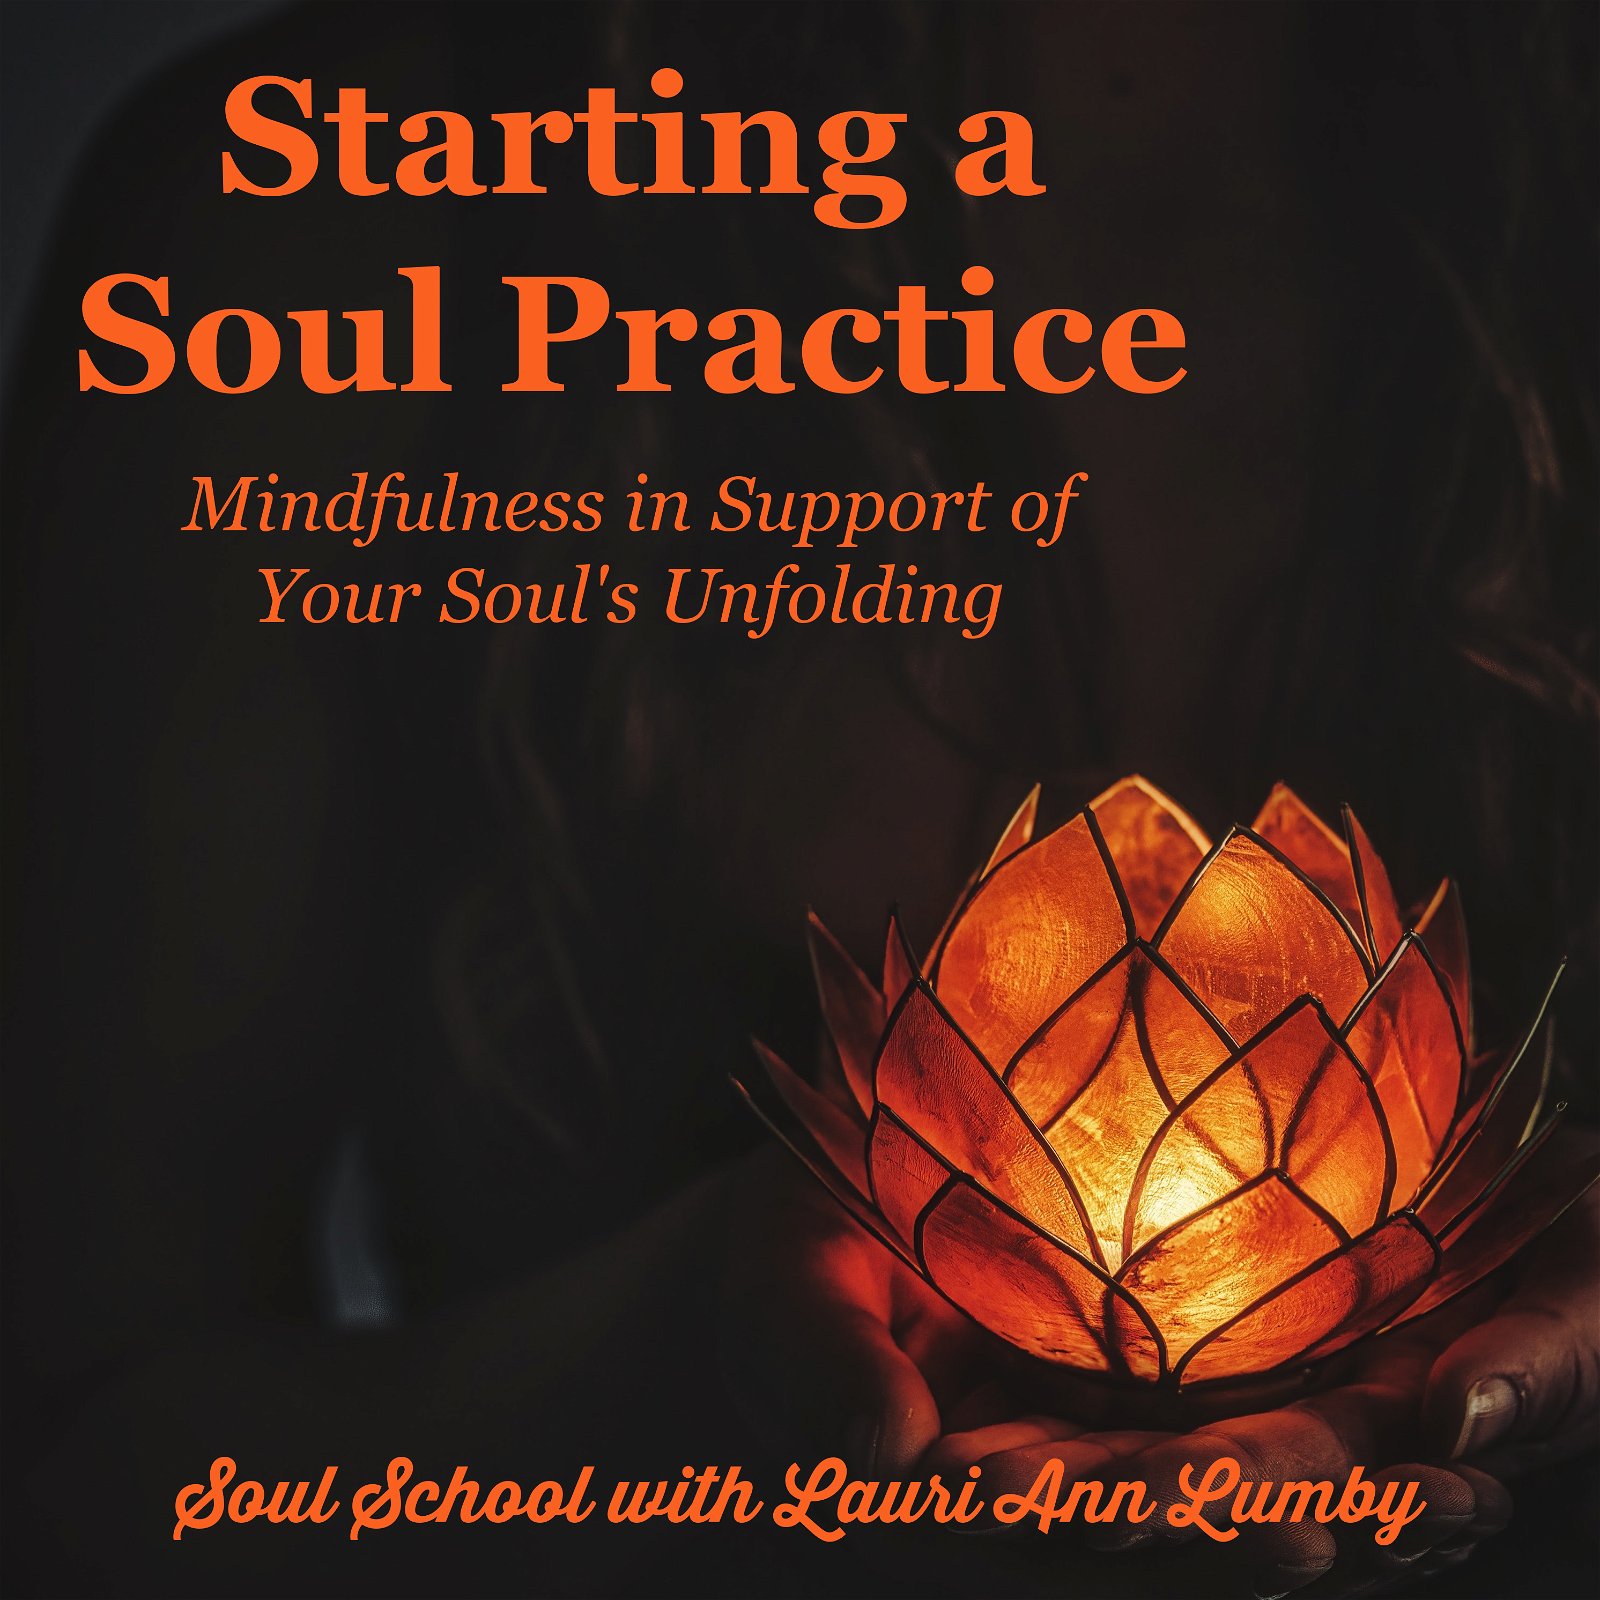 Starting a Soul Practice - Mindfulness in Support of the Soul's Unfolding